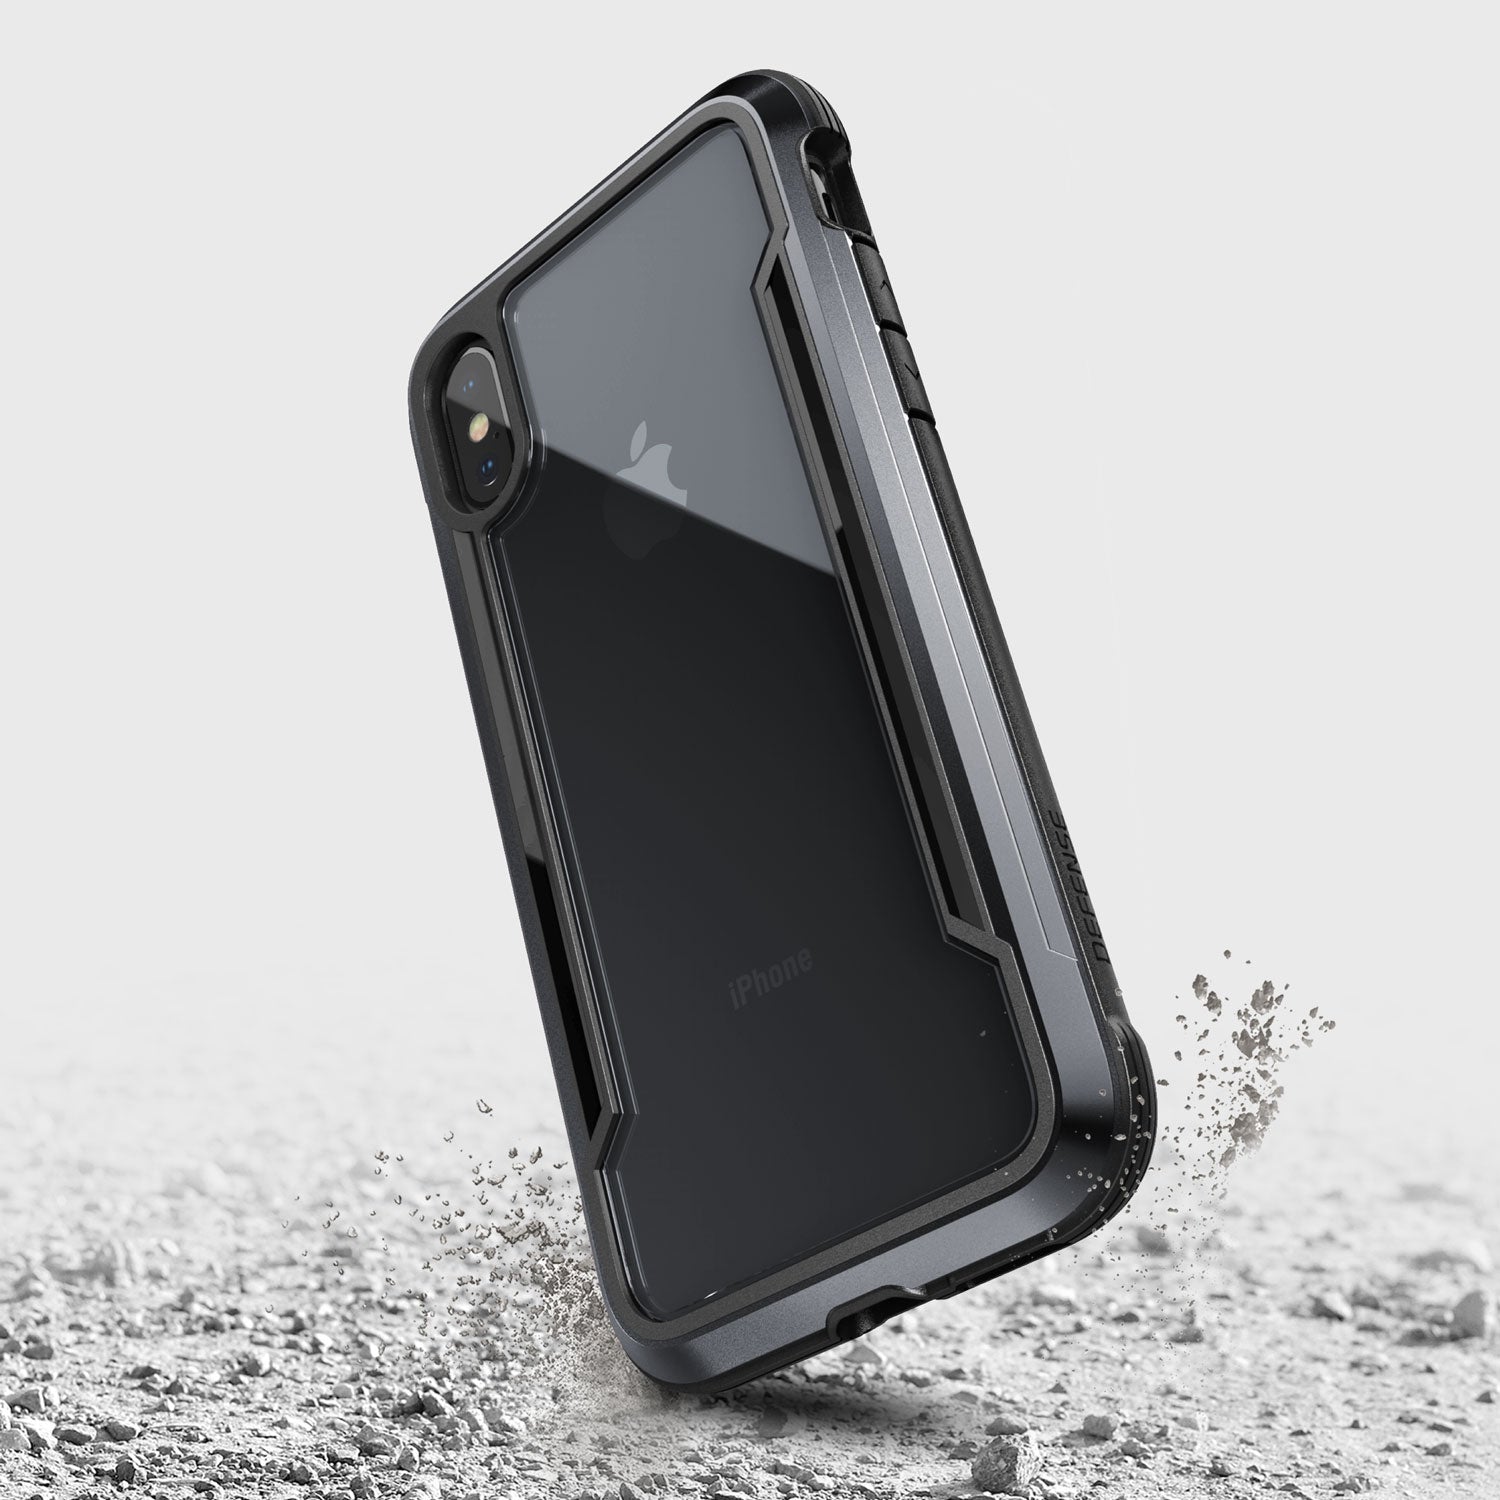 The protective iPhone XS Max Case - SHIELD, featuring a Raptic Shield design, has been dropped and lies on the ground.